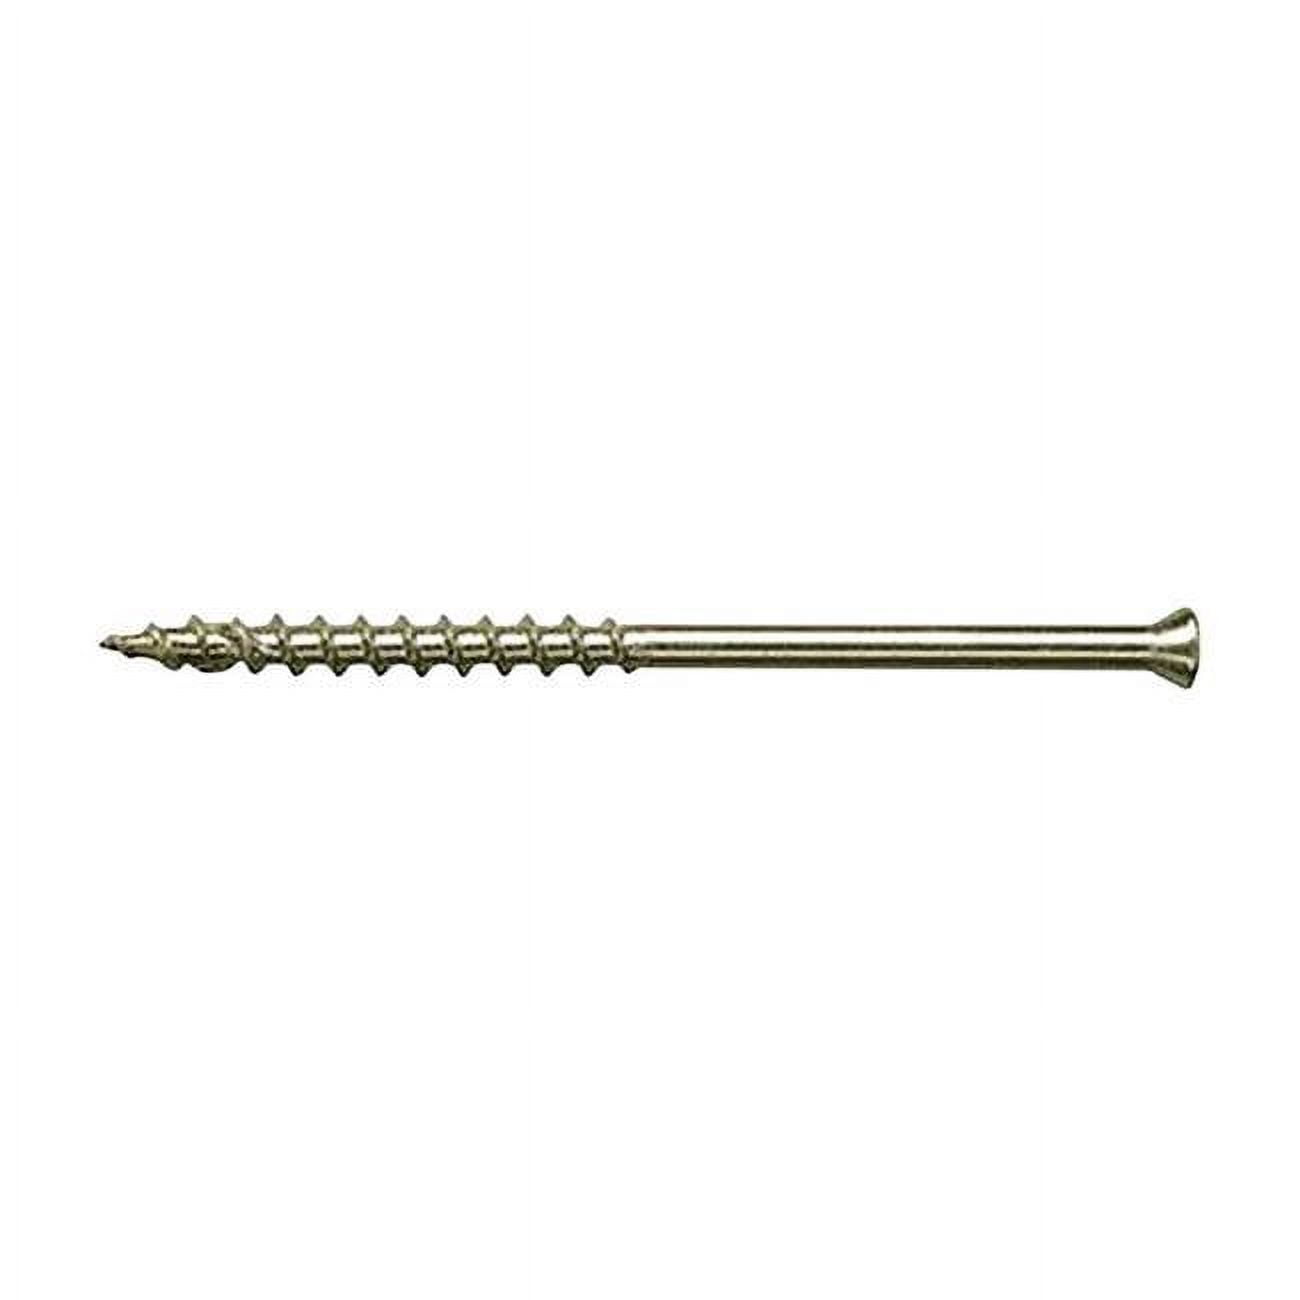 5007709 1 Lbs No.7 X 1.62 In. Square Trim Head Stainless Steel Screws, Pack Of 12